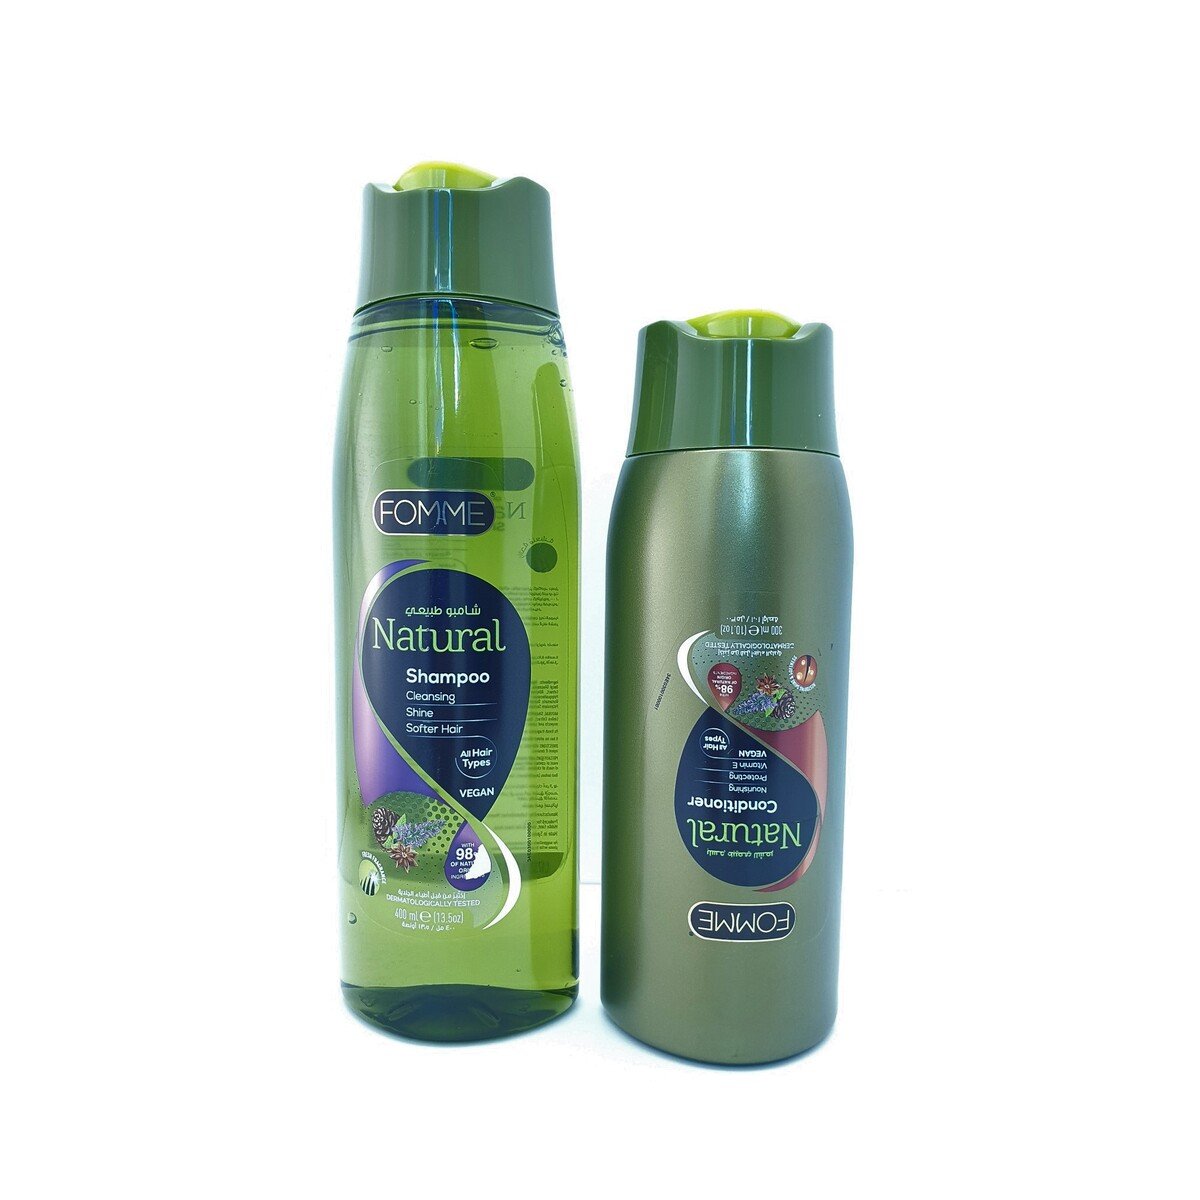 Fomme Natural Shampoo 400ml + Fomme Natural Conditioner 300 ml